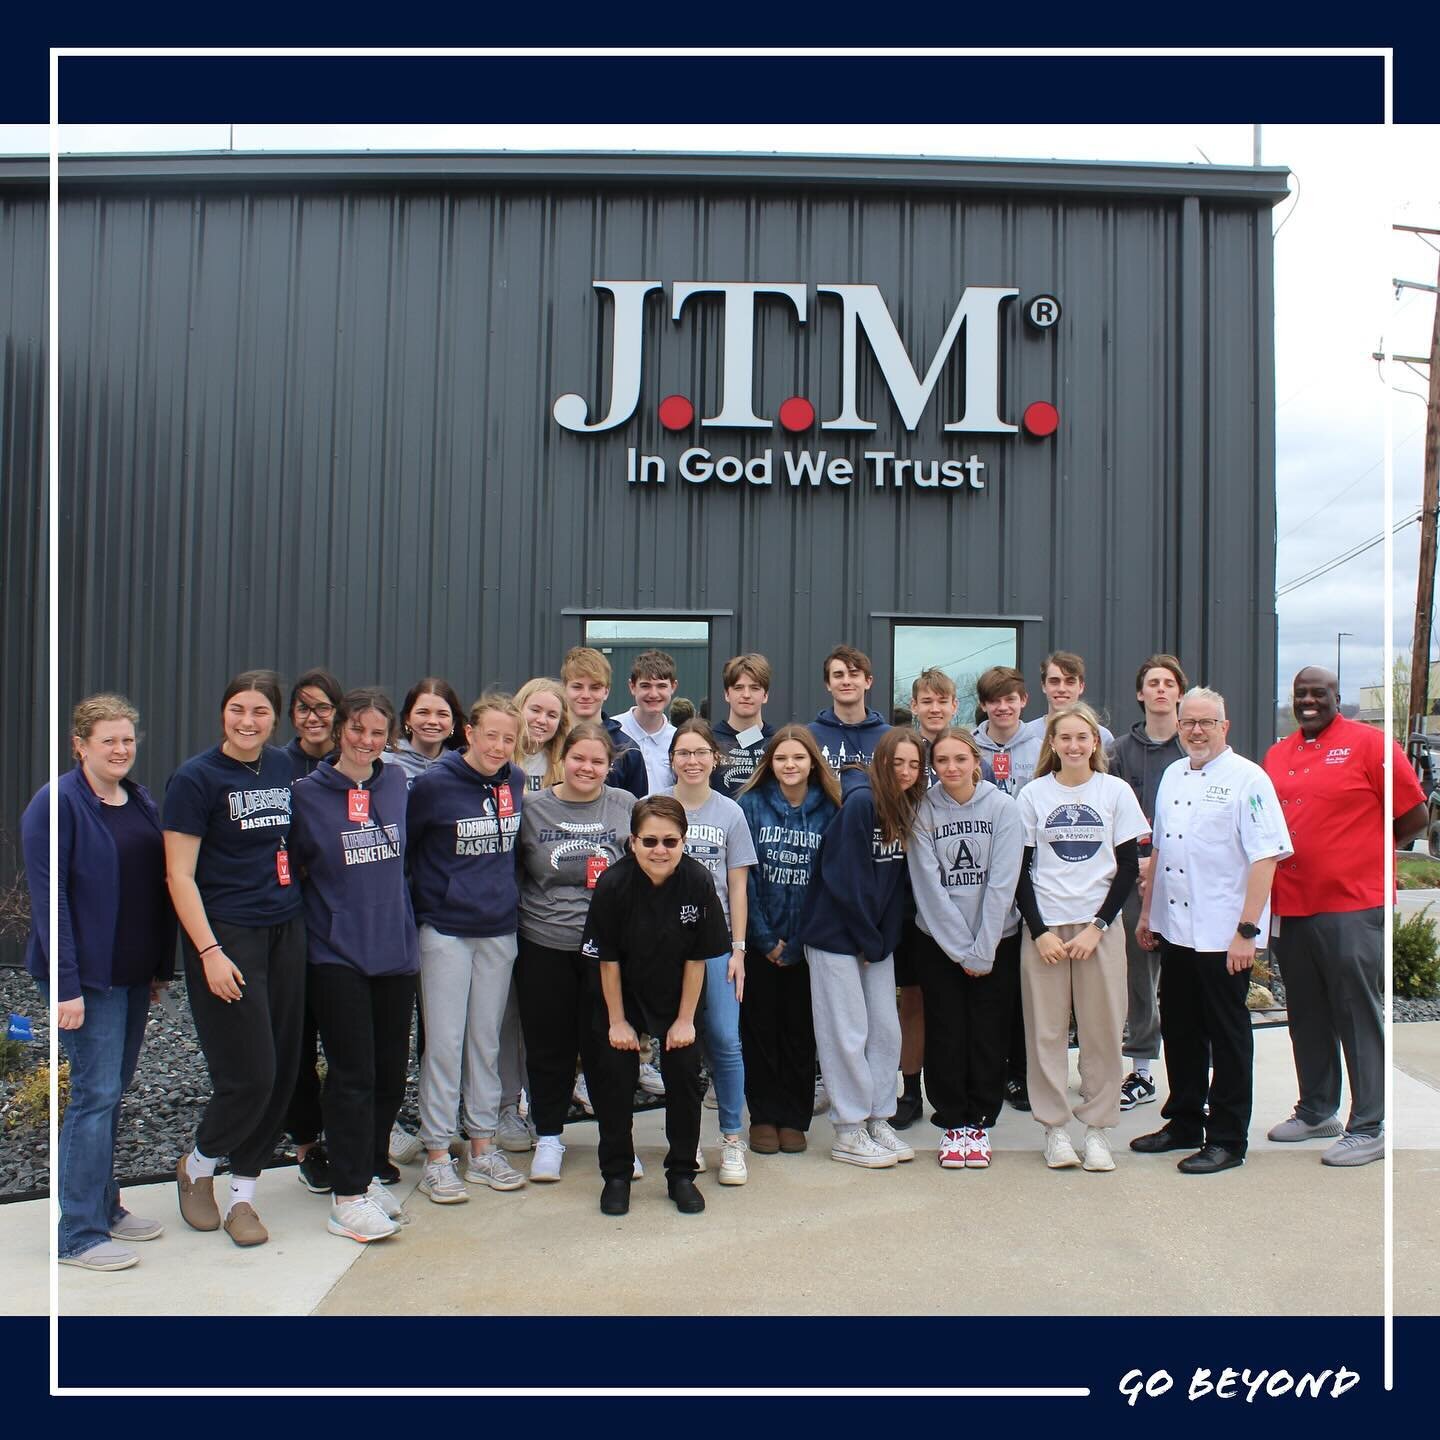 Yesterday, the Culinary Arts&nbsp;class traveled to JTM FoodGroup in Harrison for a cooking experience with their staff culinarians.&nbsp; Students worked in small groups to create 4-5 dishes with a chef for a class buffet.&nbsp; After cooking, they 